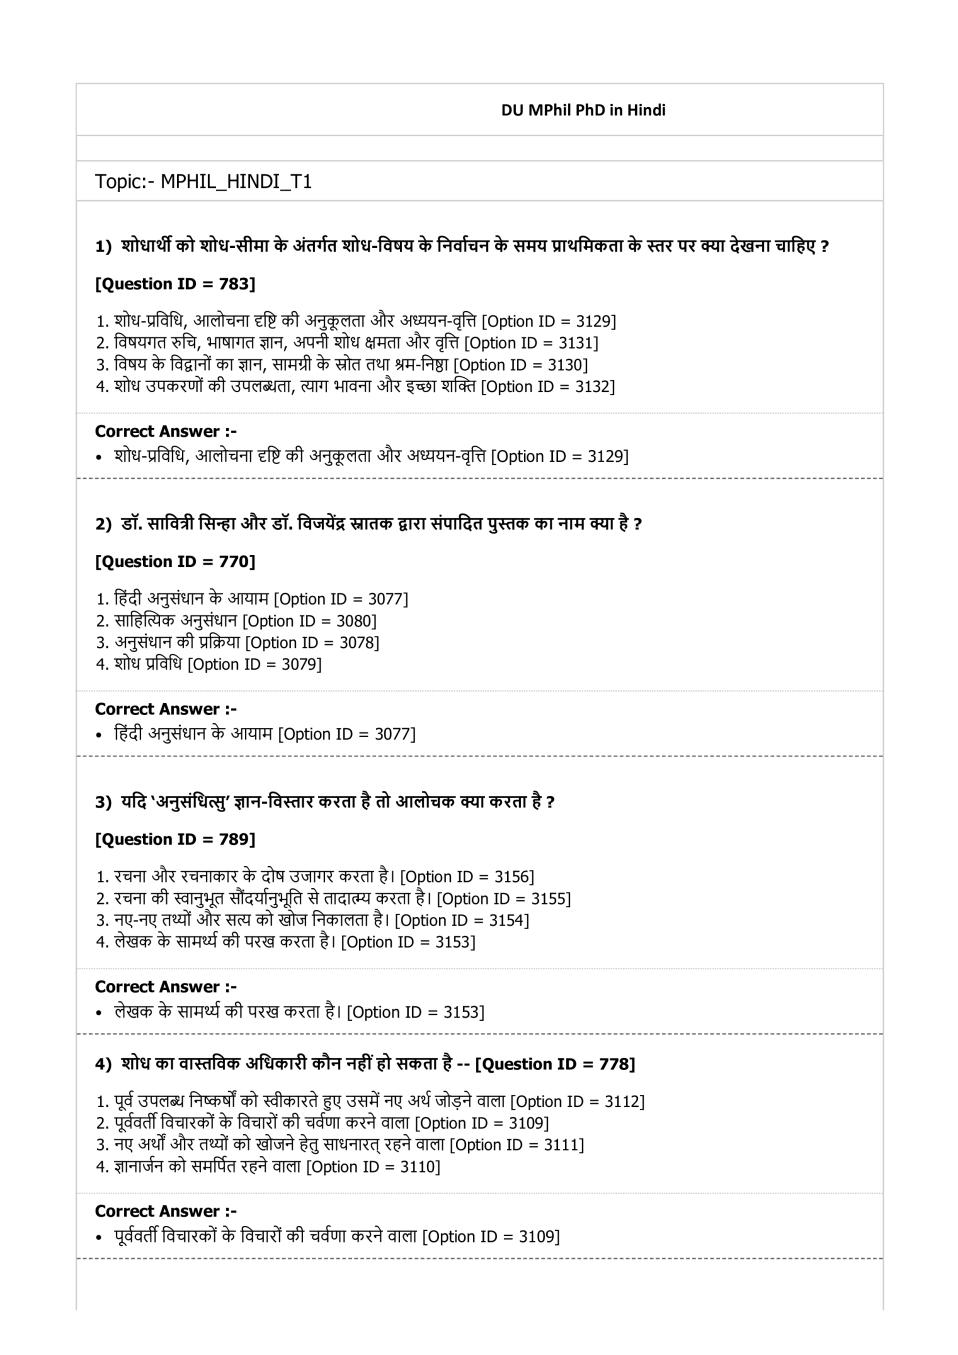 DUET Question Paper 2019 for M.Phil Ph.D in Hindi - Page 1